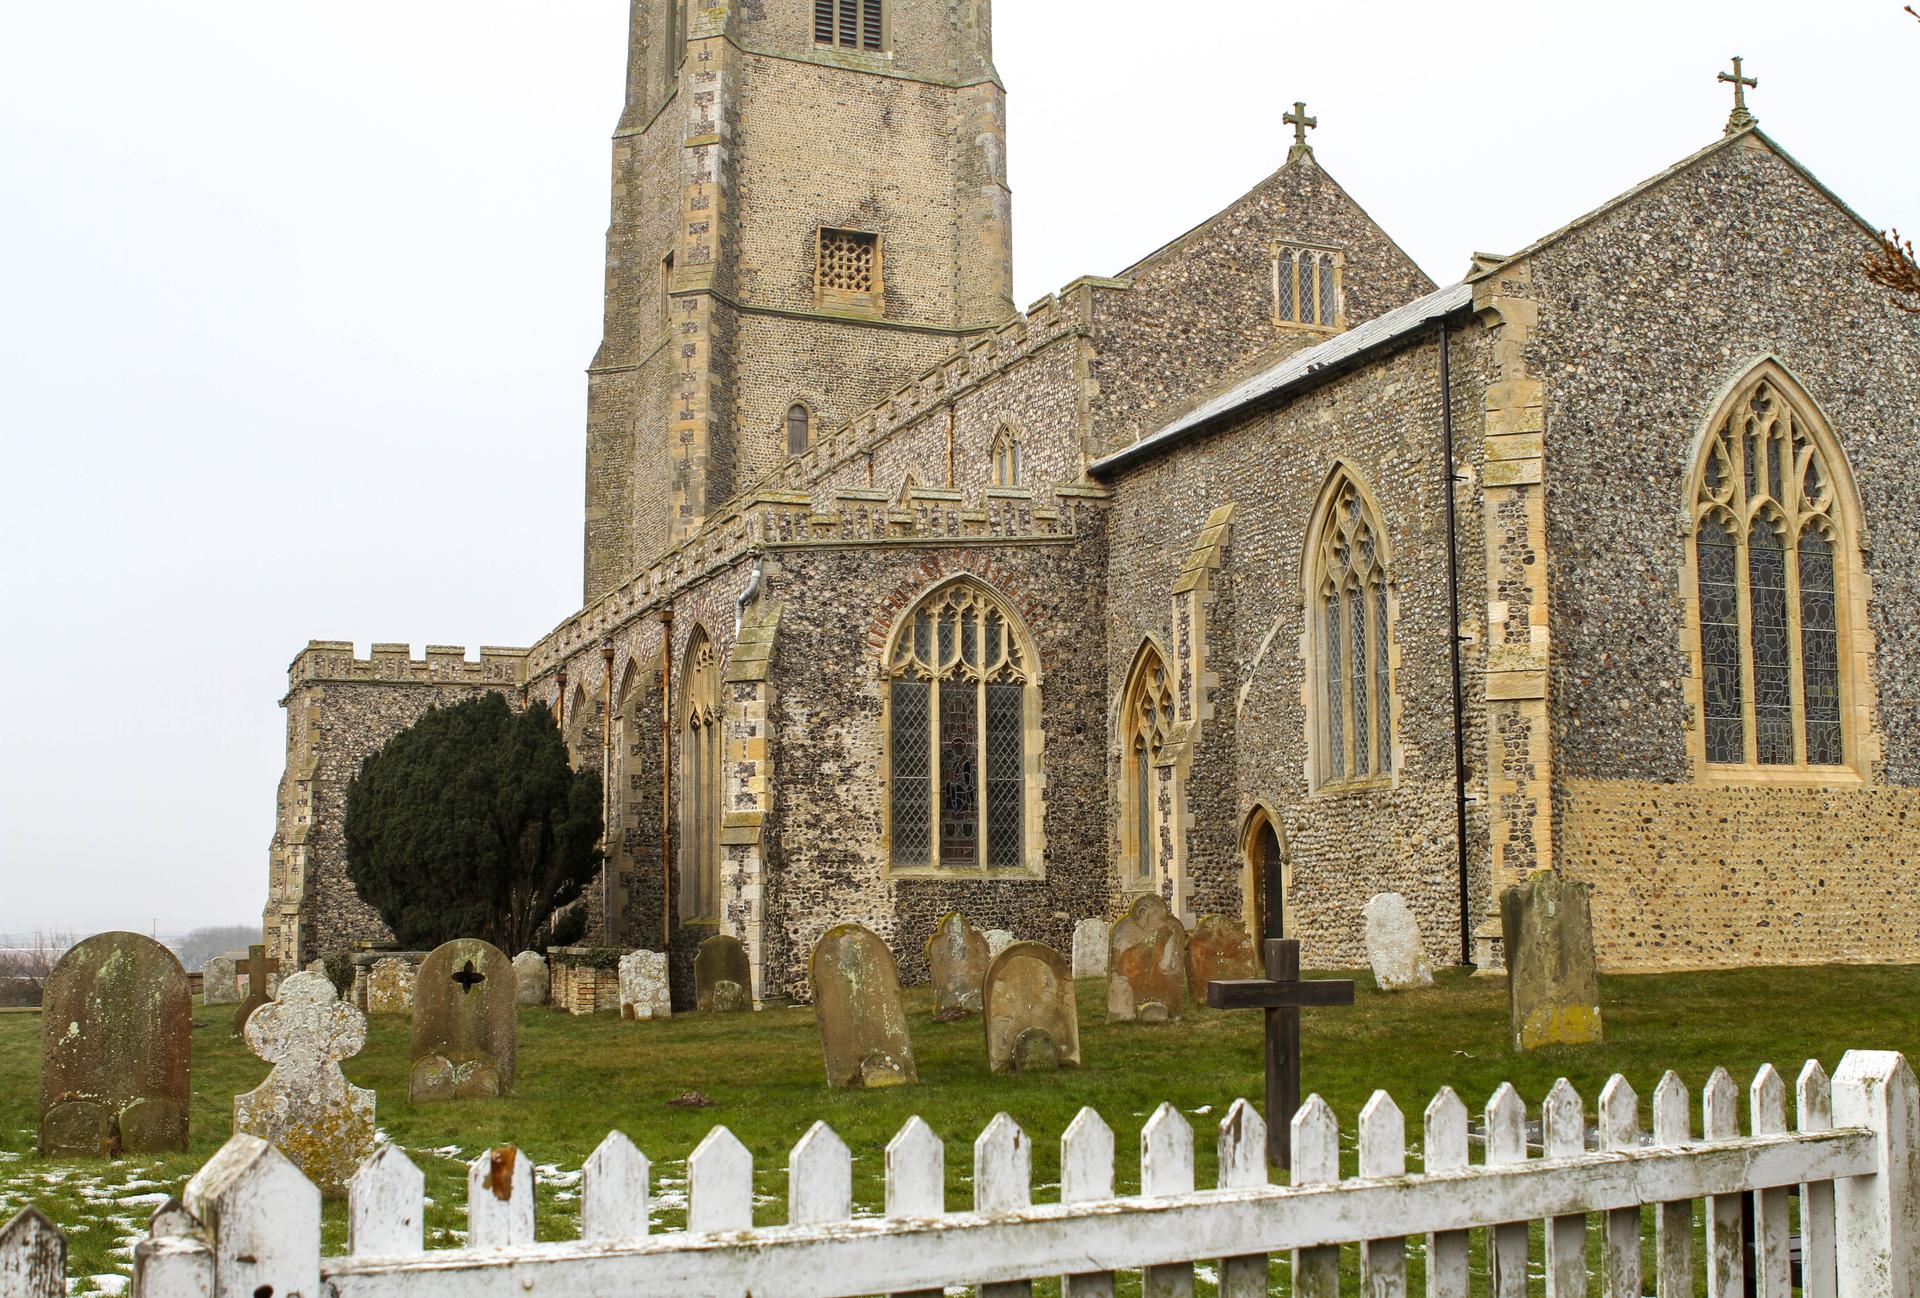 St. Mary's Church in Happisburgh